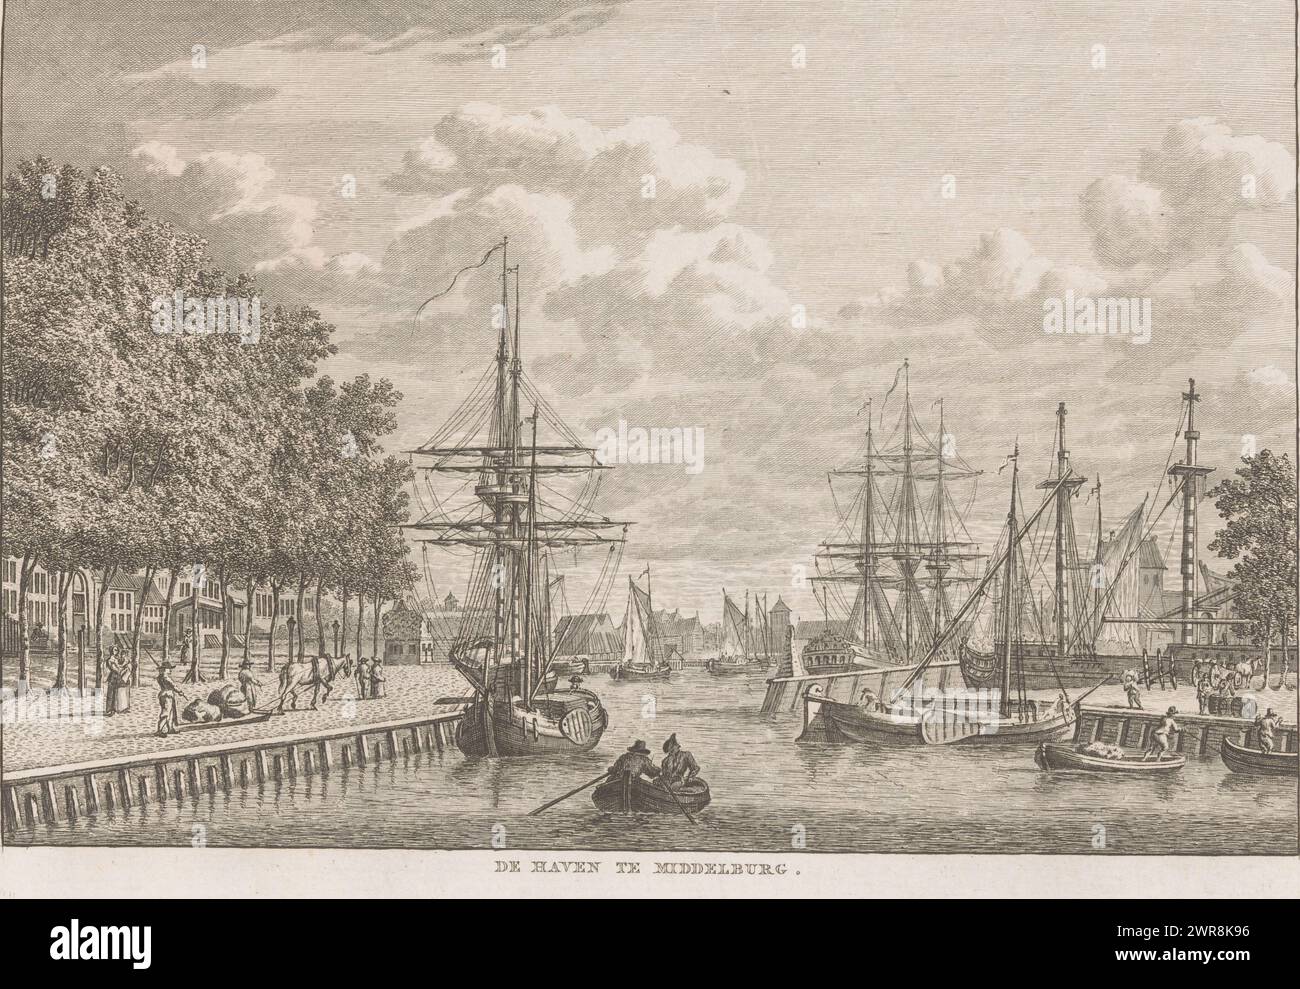 View of the port of Middelburg, De Haven te Middelburg (title on object), print maker: Carel Frederik Bendorp (I), after drawing by: Jan Bulthuis, 1786 - 1792, paper, etching, height 176 mm × width 241 mm, print Stock Photo